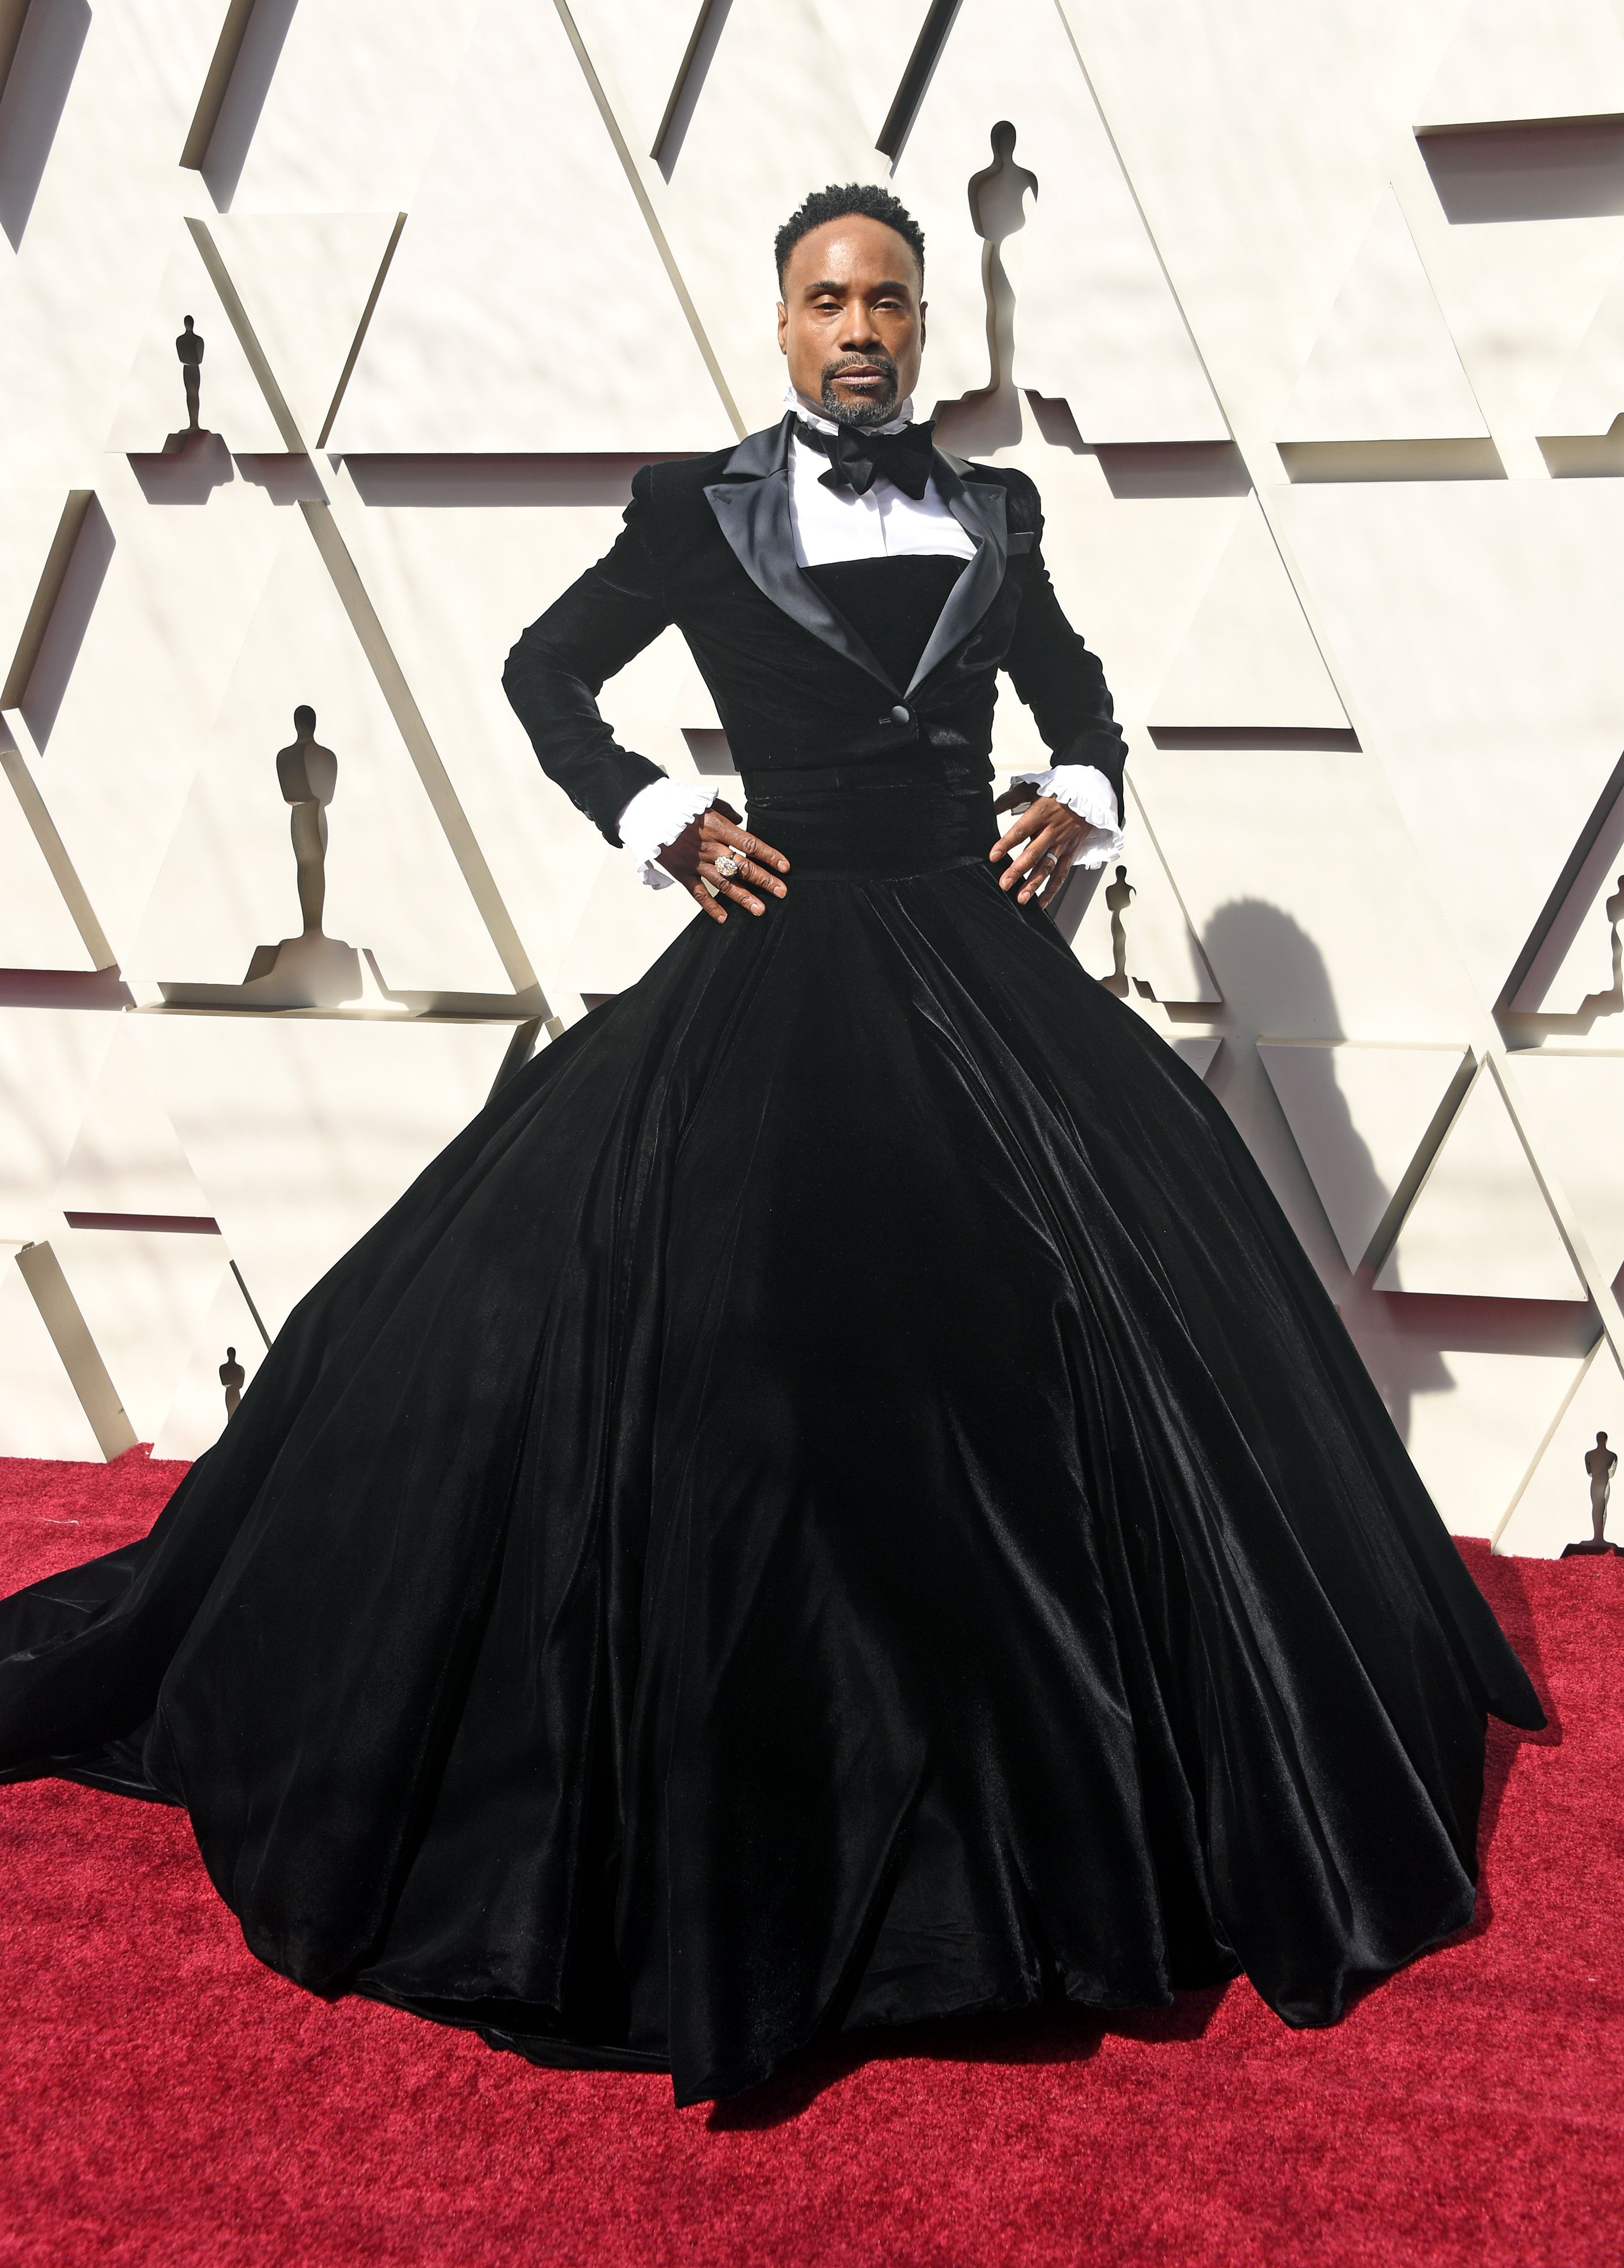 Oscars 2020 Red Carpet: Billy Porter Literally Shined in His Oscars Gown |  Teen Vogue